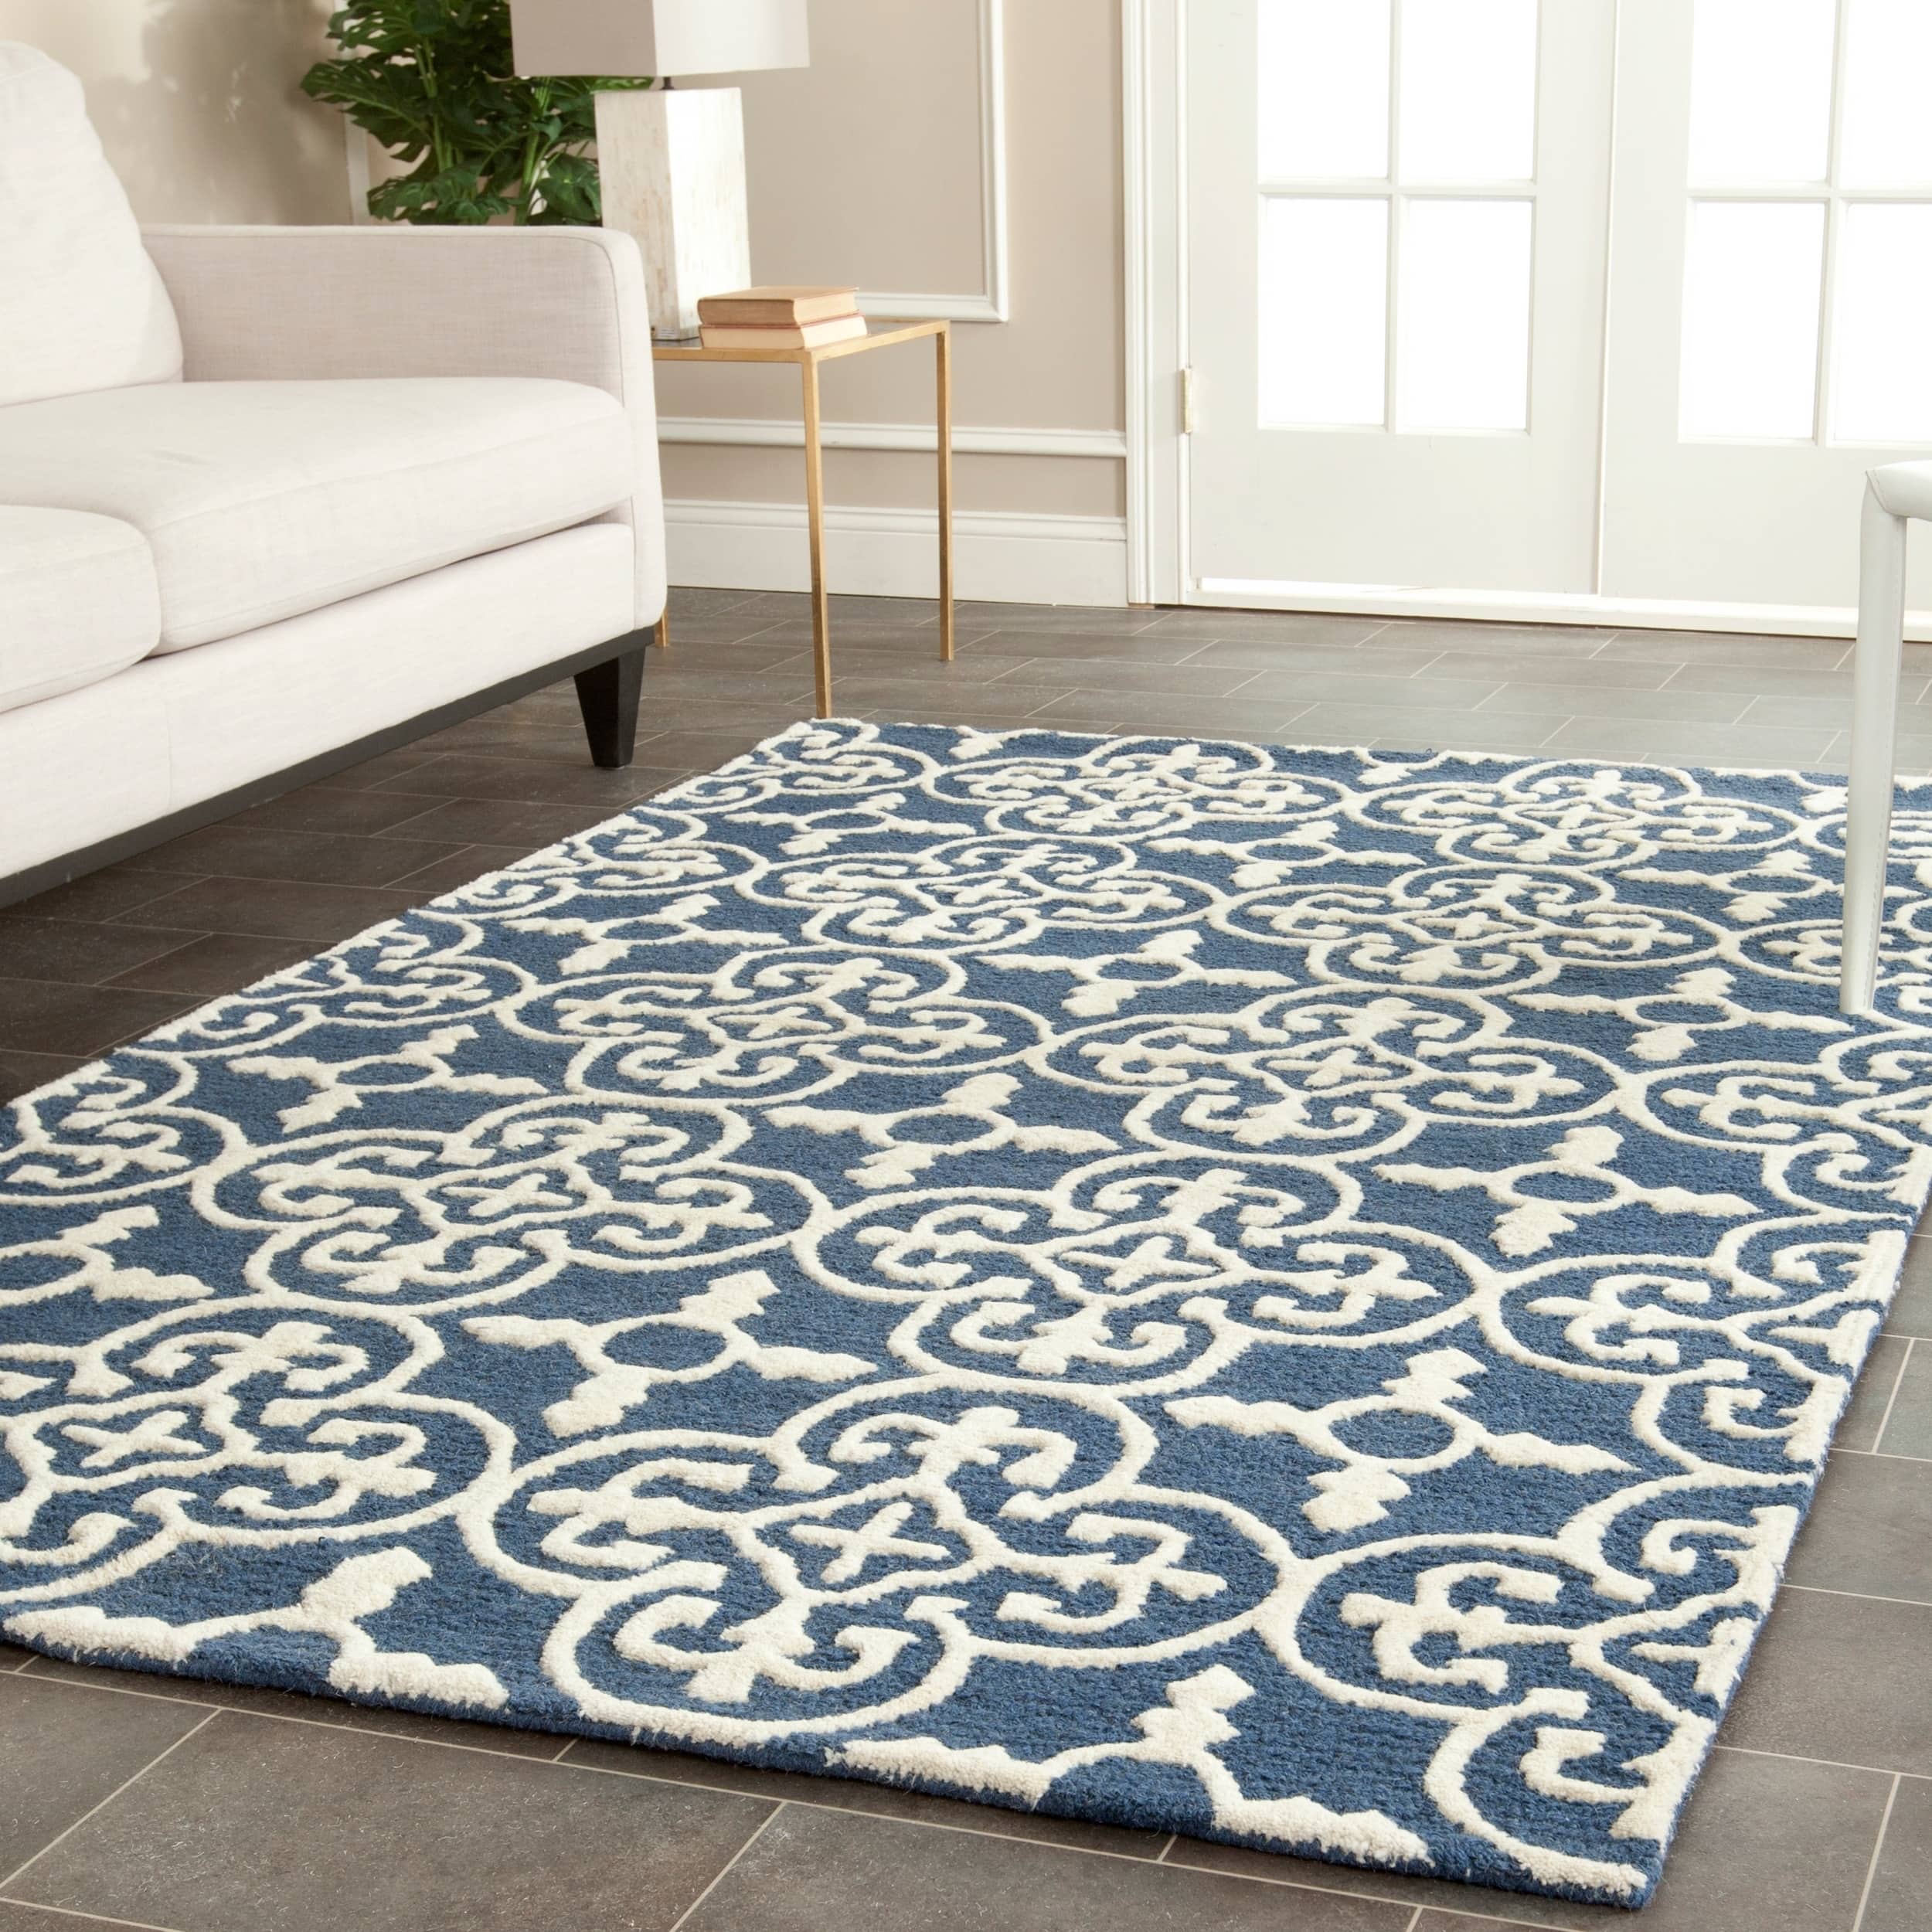 6x9 area rugs